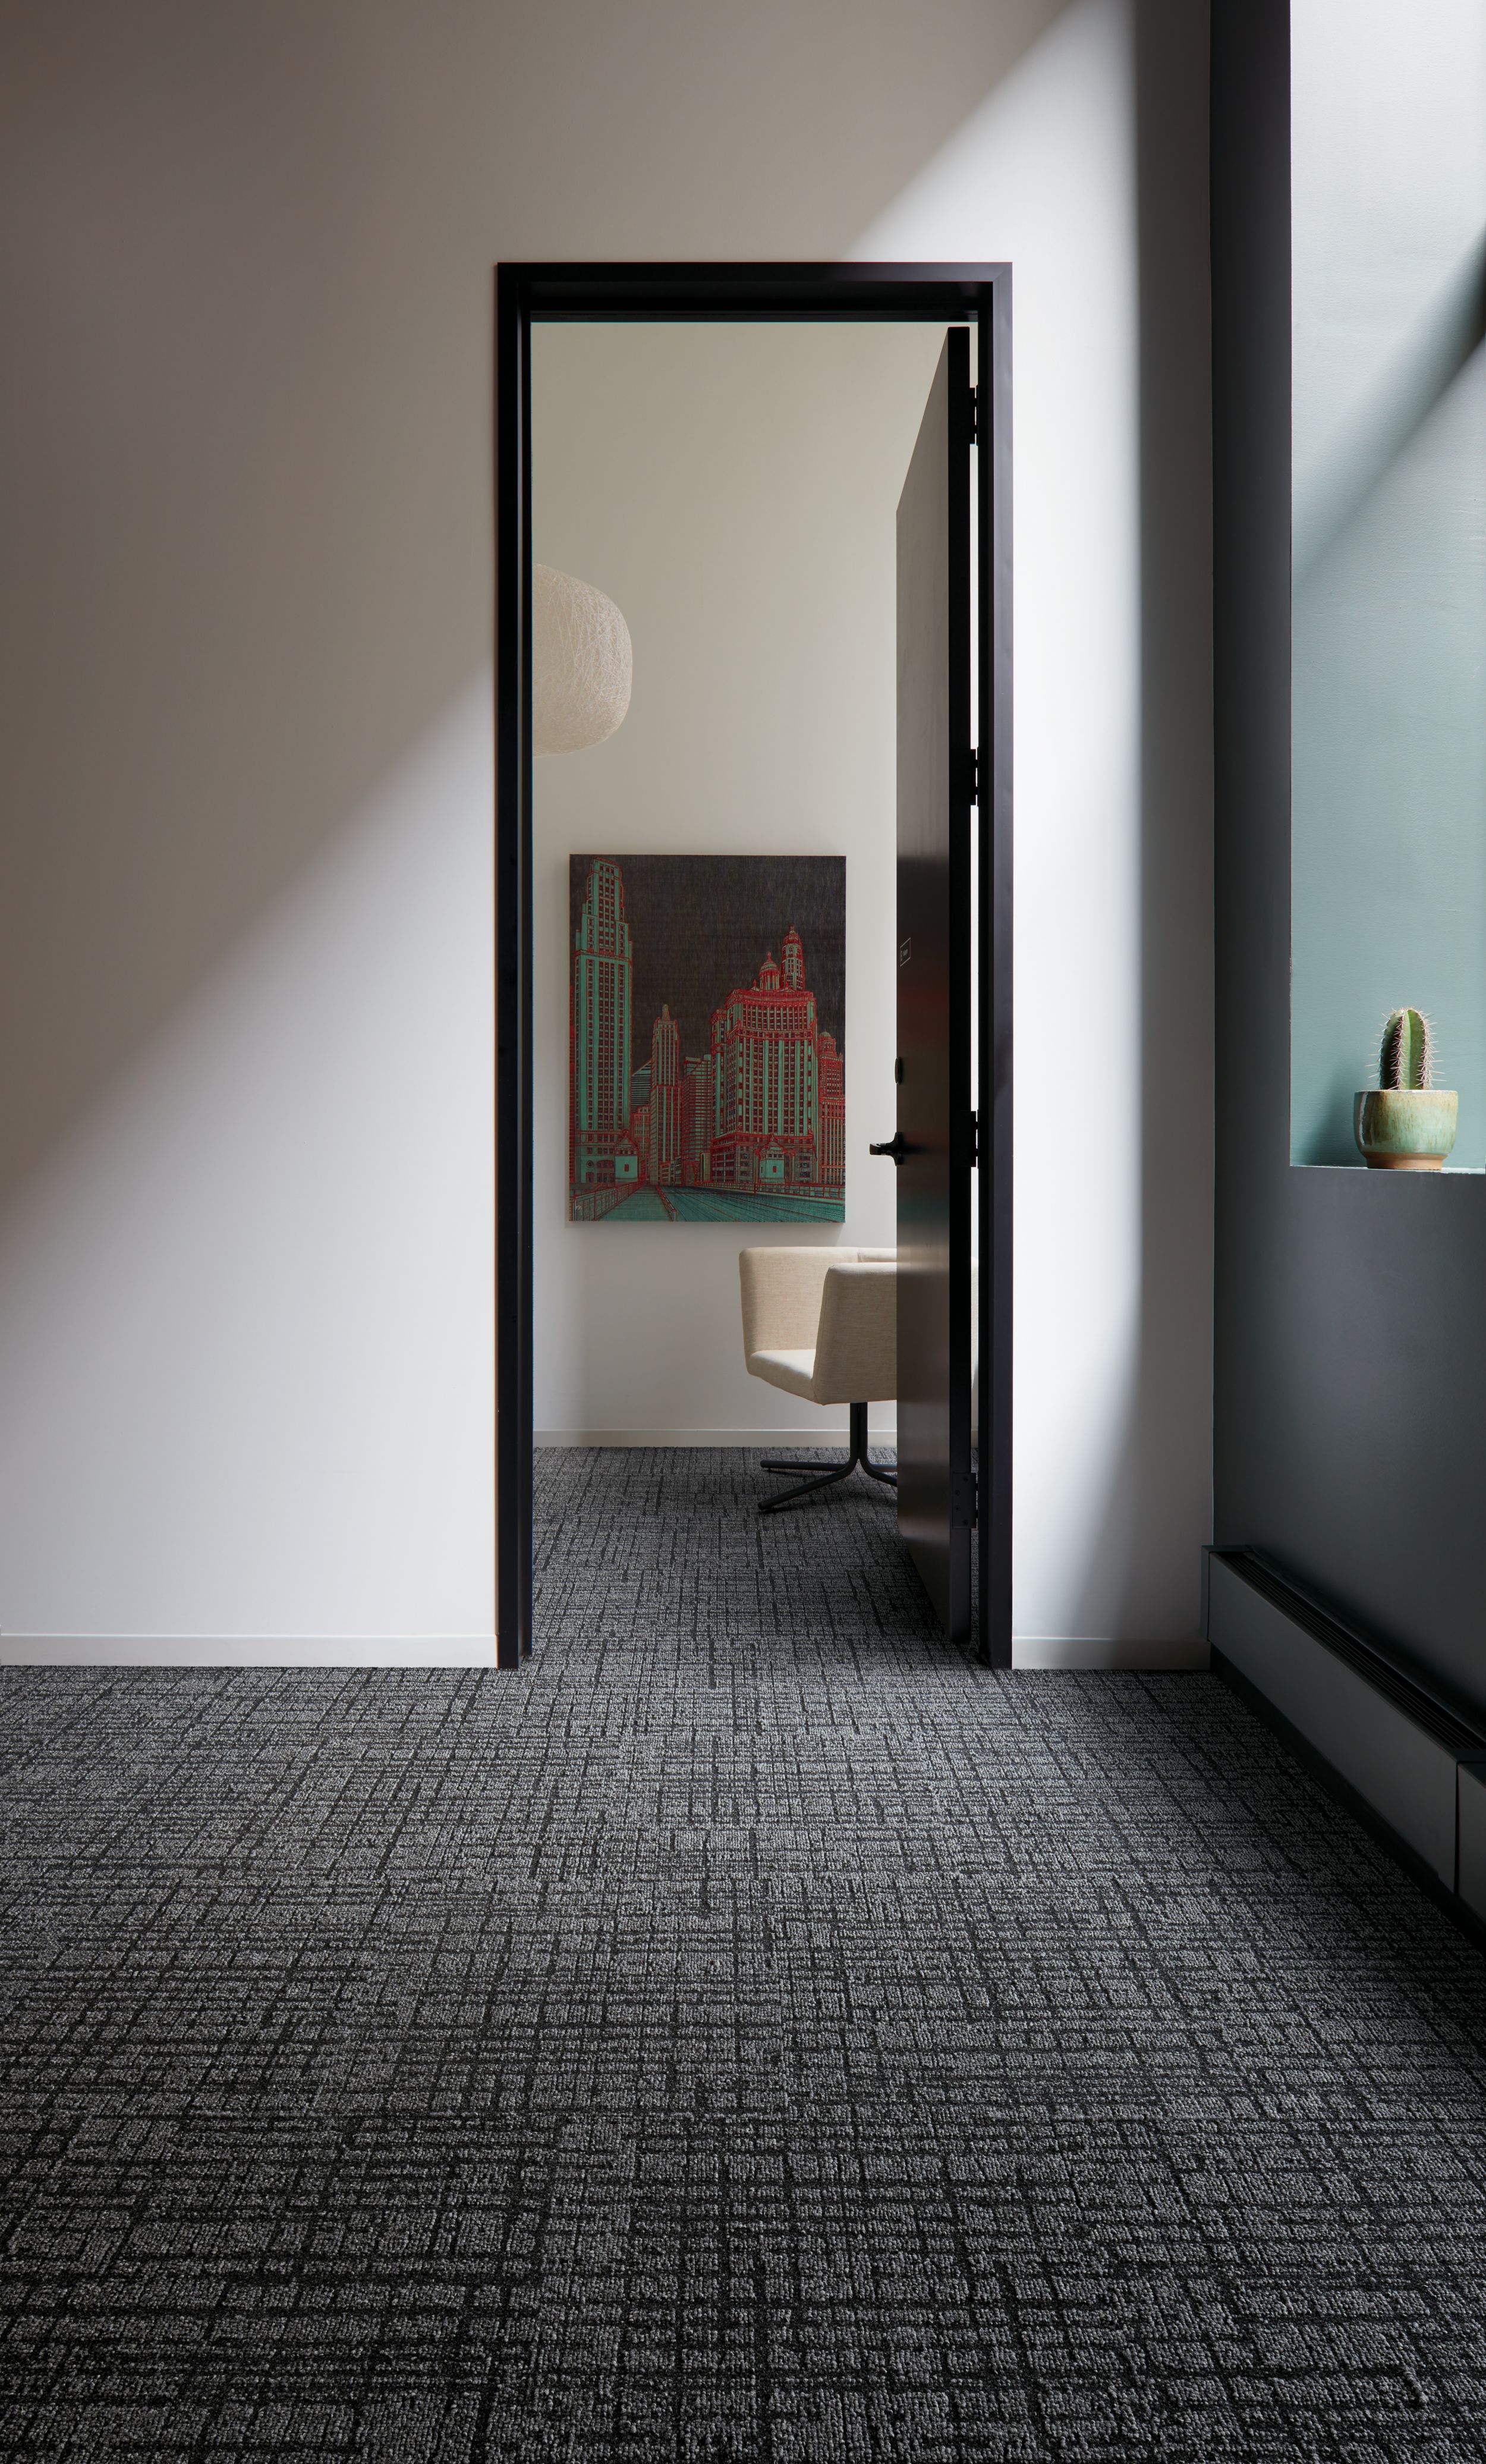 Interface Duplex carpet tile in small room with doorway leading to other room image number 1